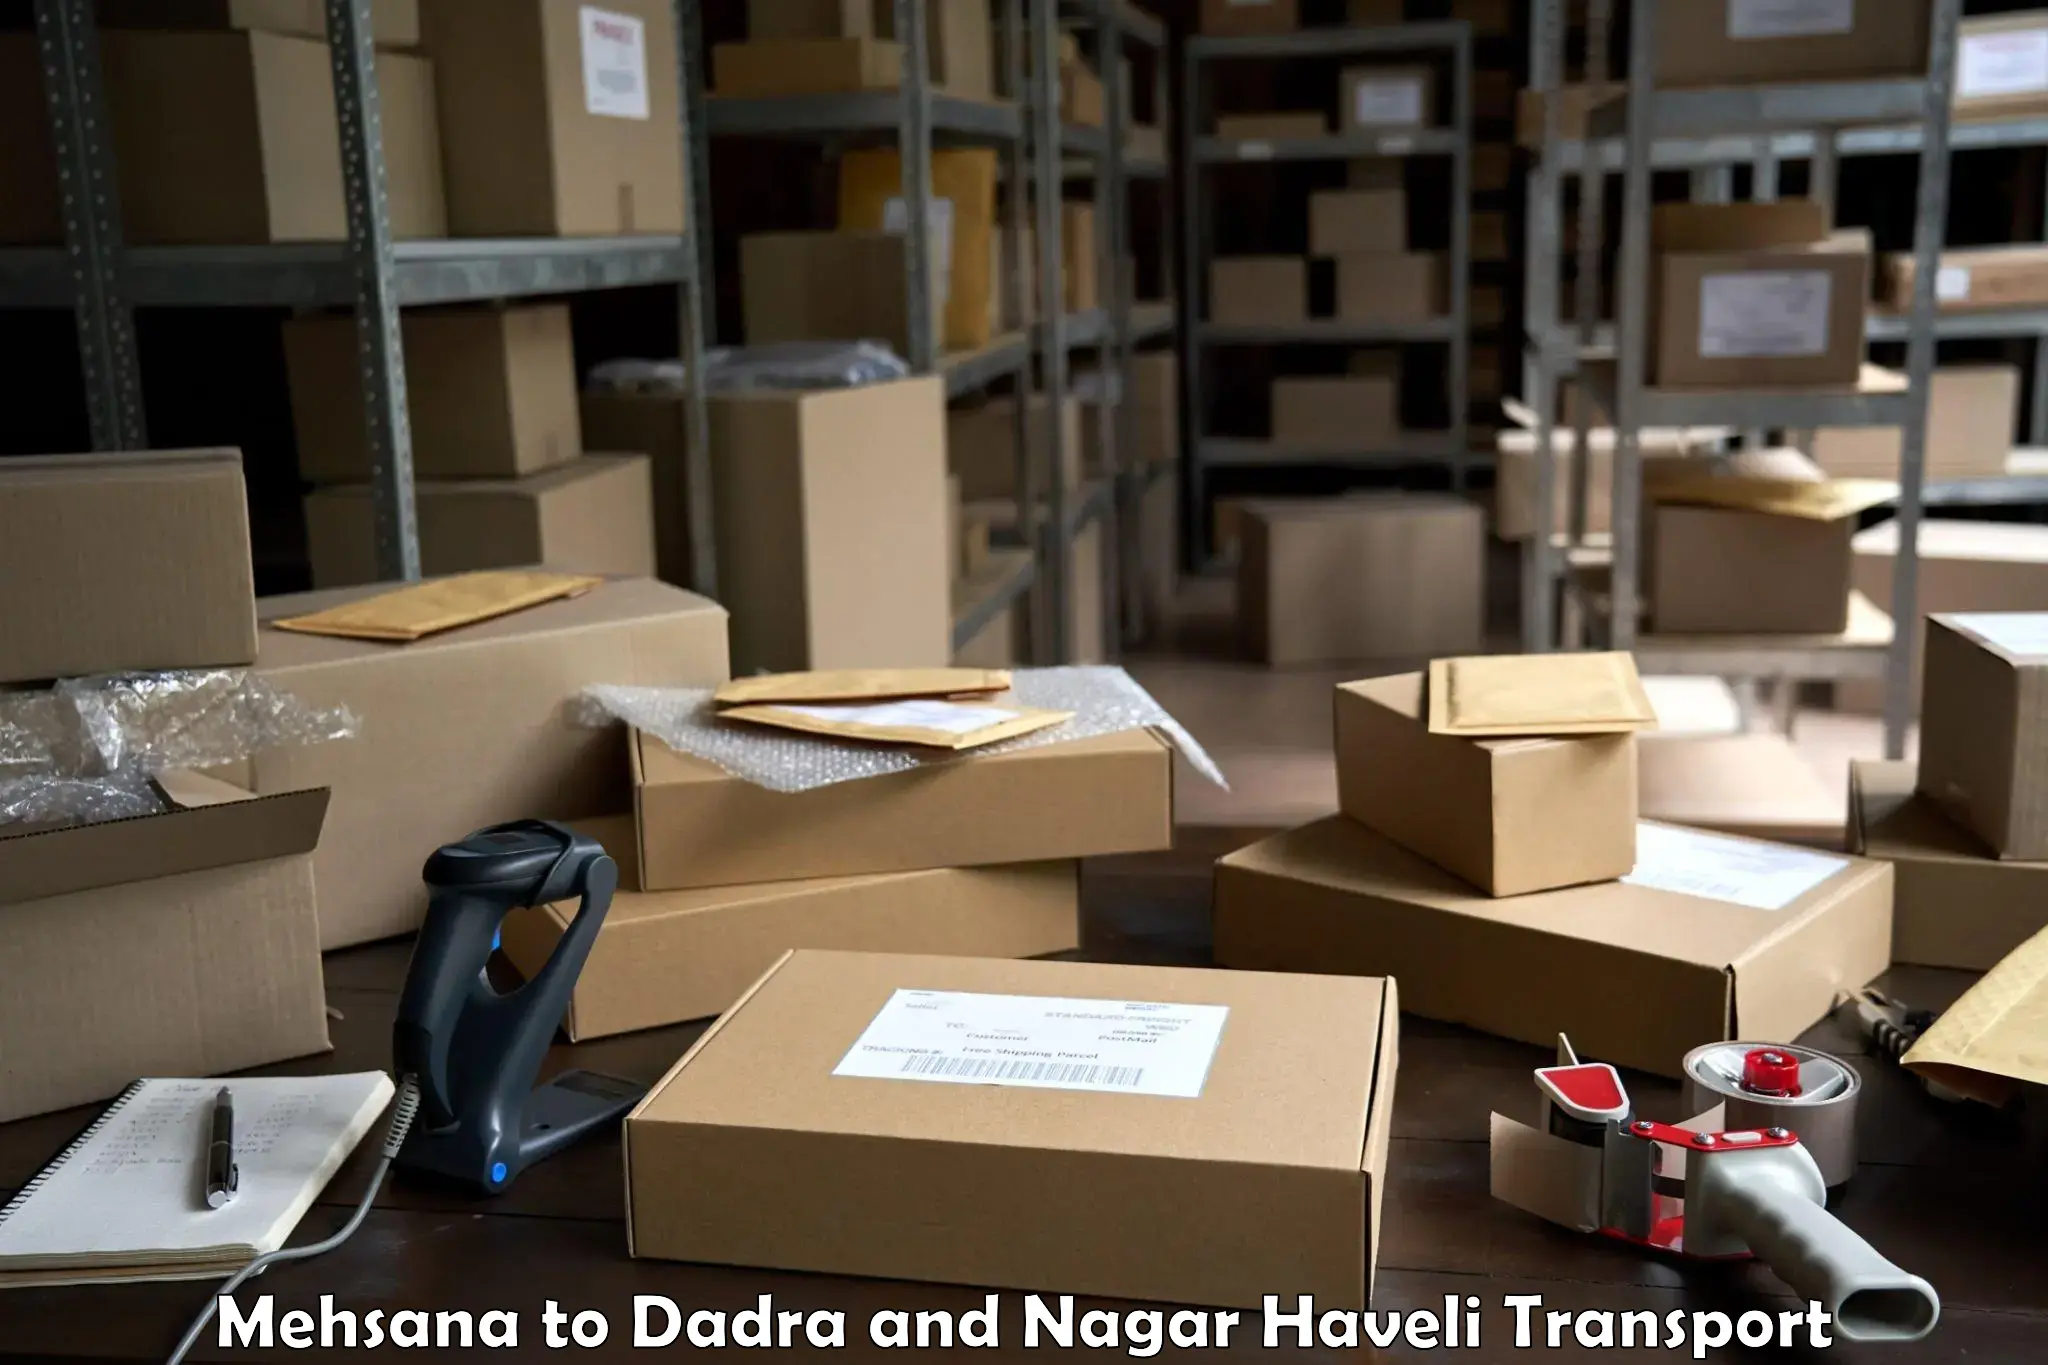 Container transport service Mehsana to Dadra and Nagar Haveli